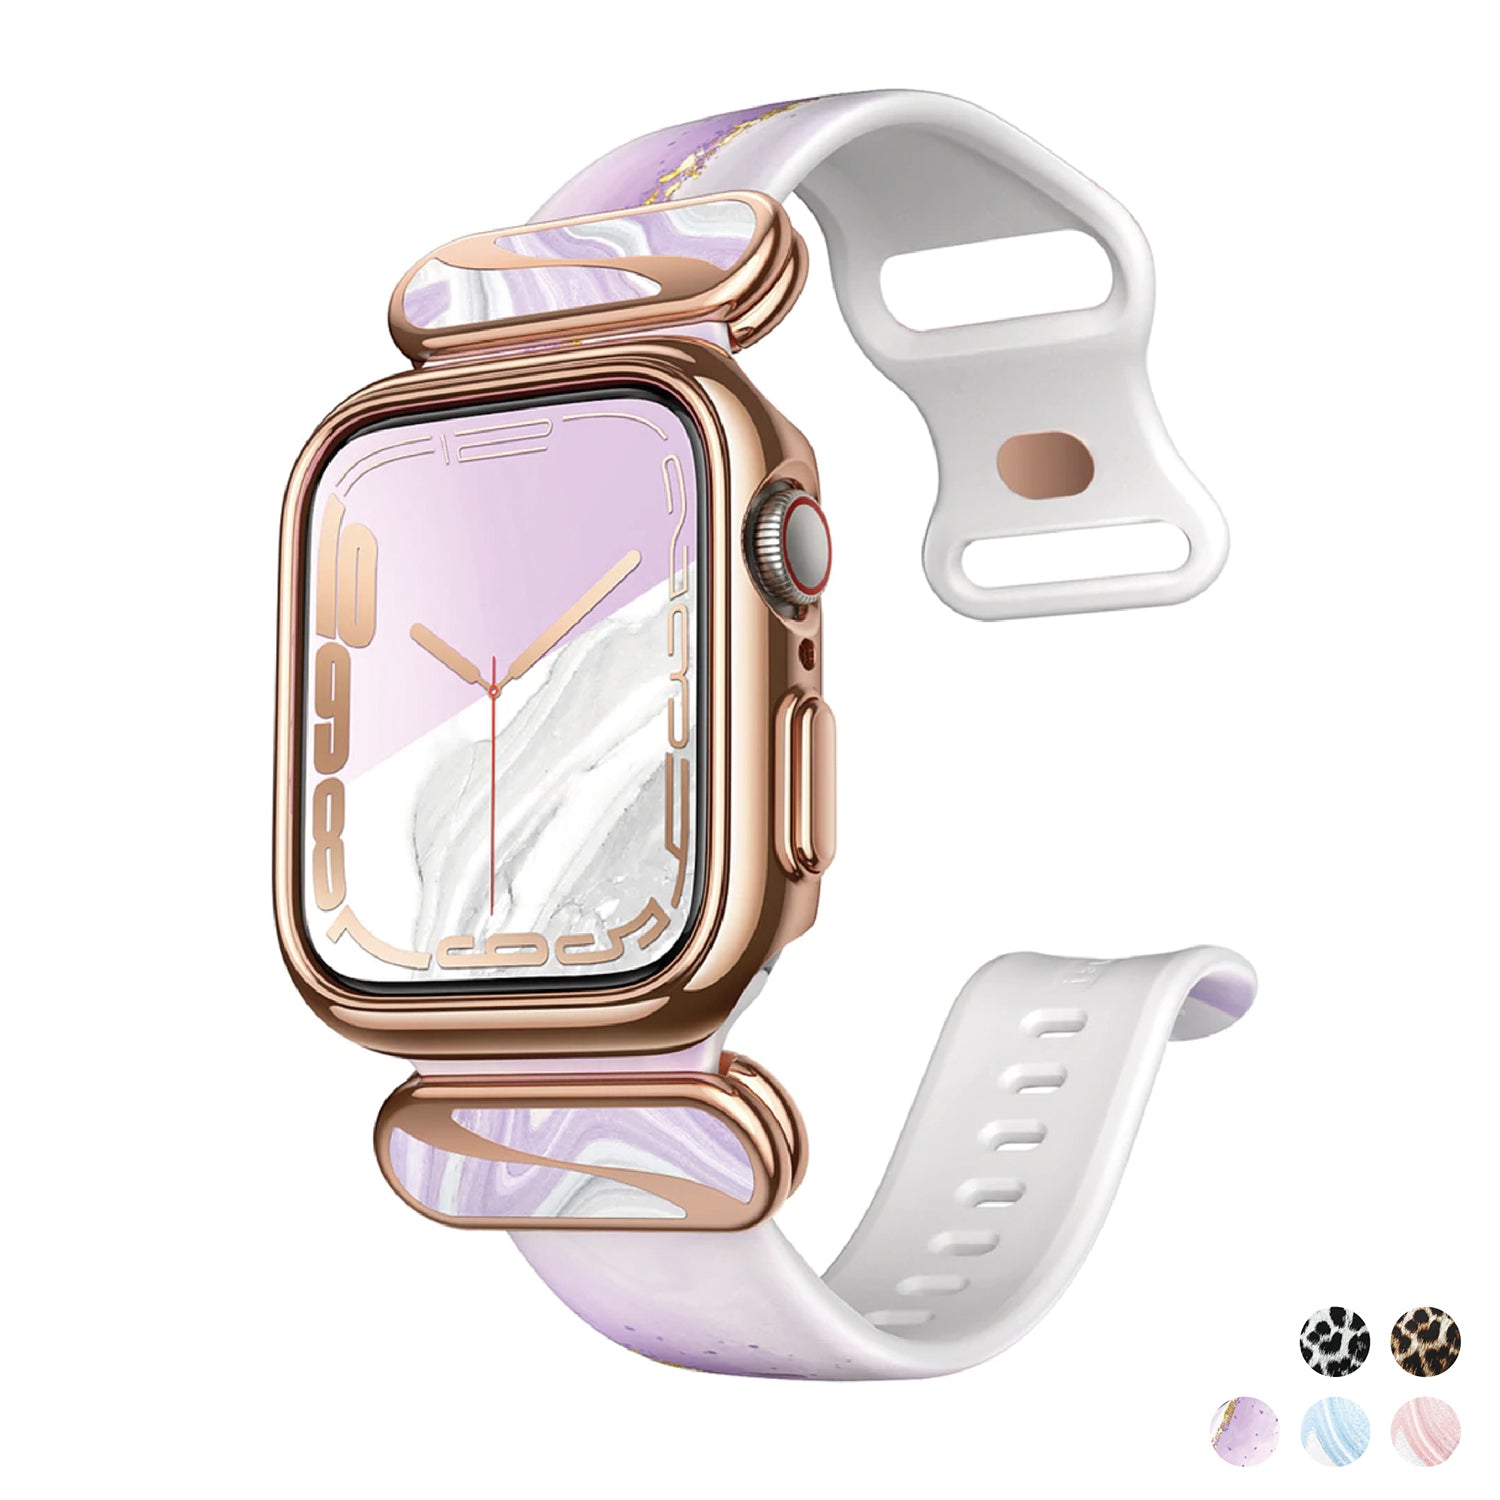 i-Blason Cosmo Stylish Sporty Protective Bumper Case with Adjustable Strap Bands for Apple Watch Series 7/6/SE/5/4 (40mm/41mm) Default i-Blason 